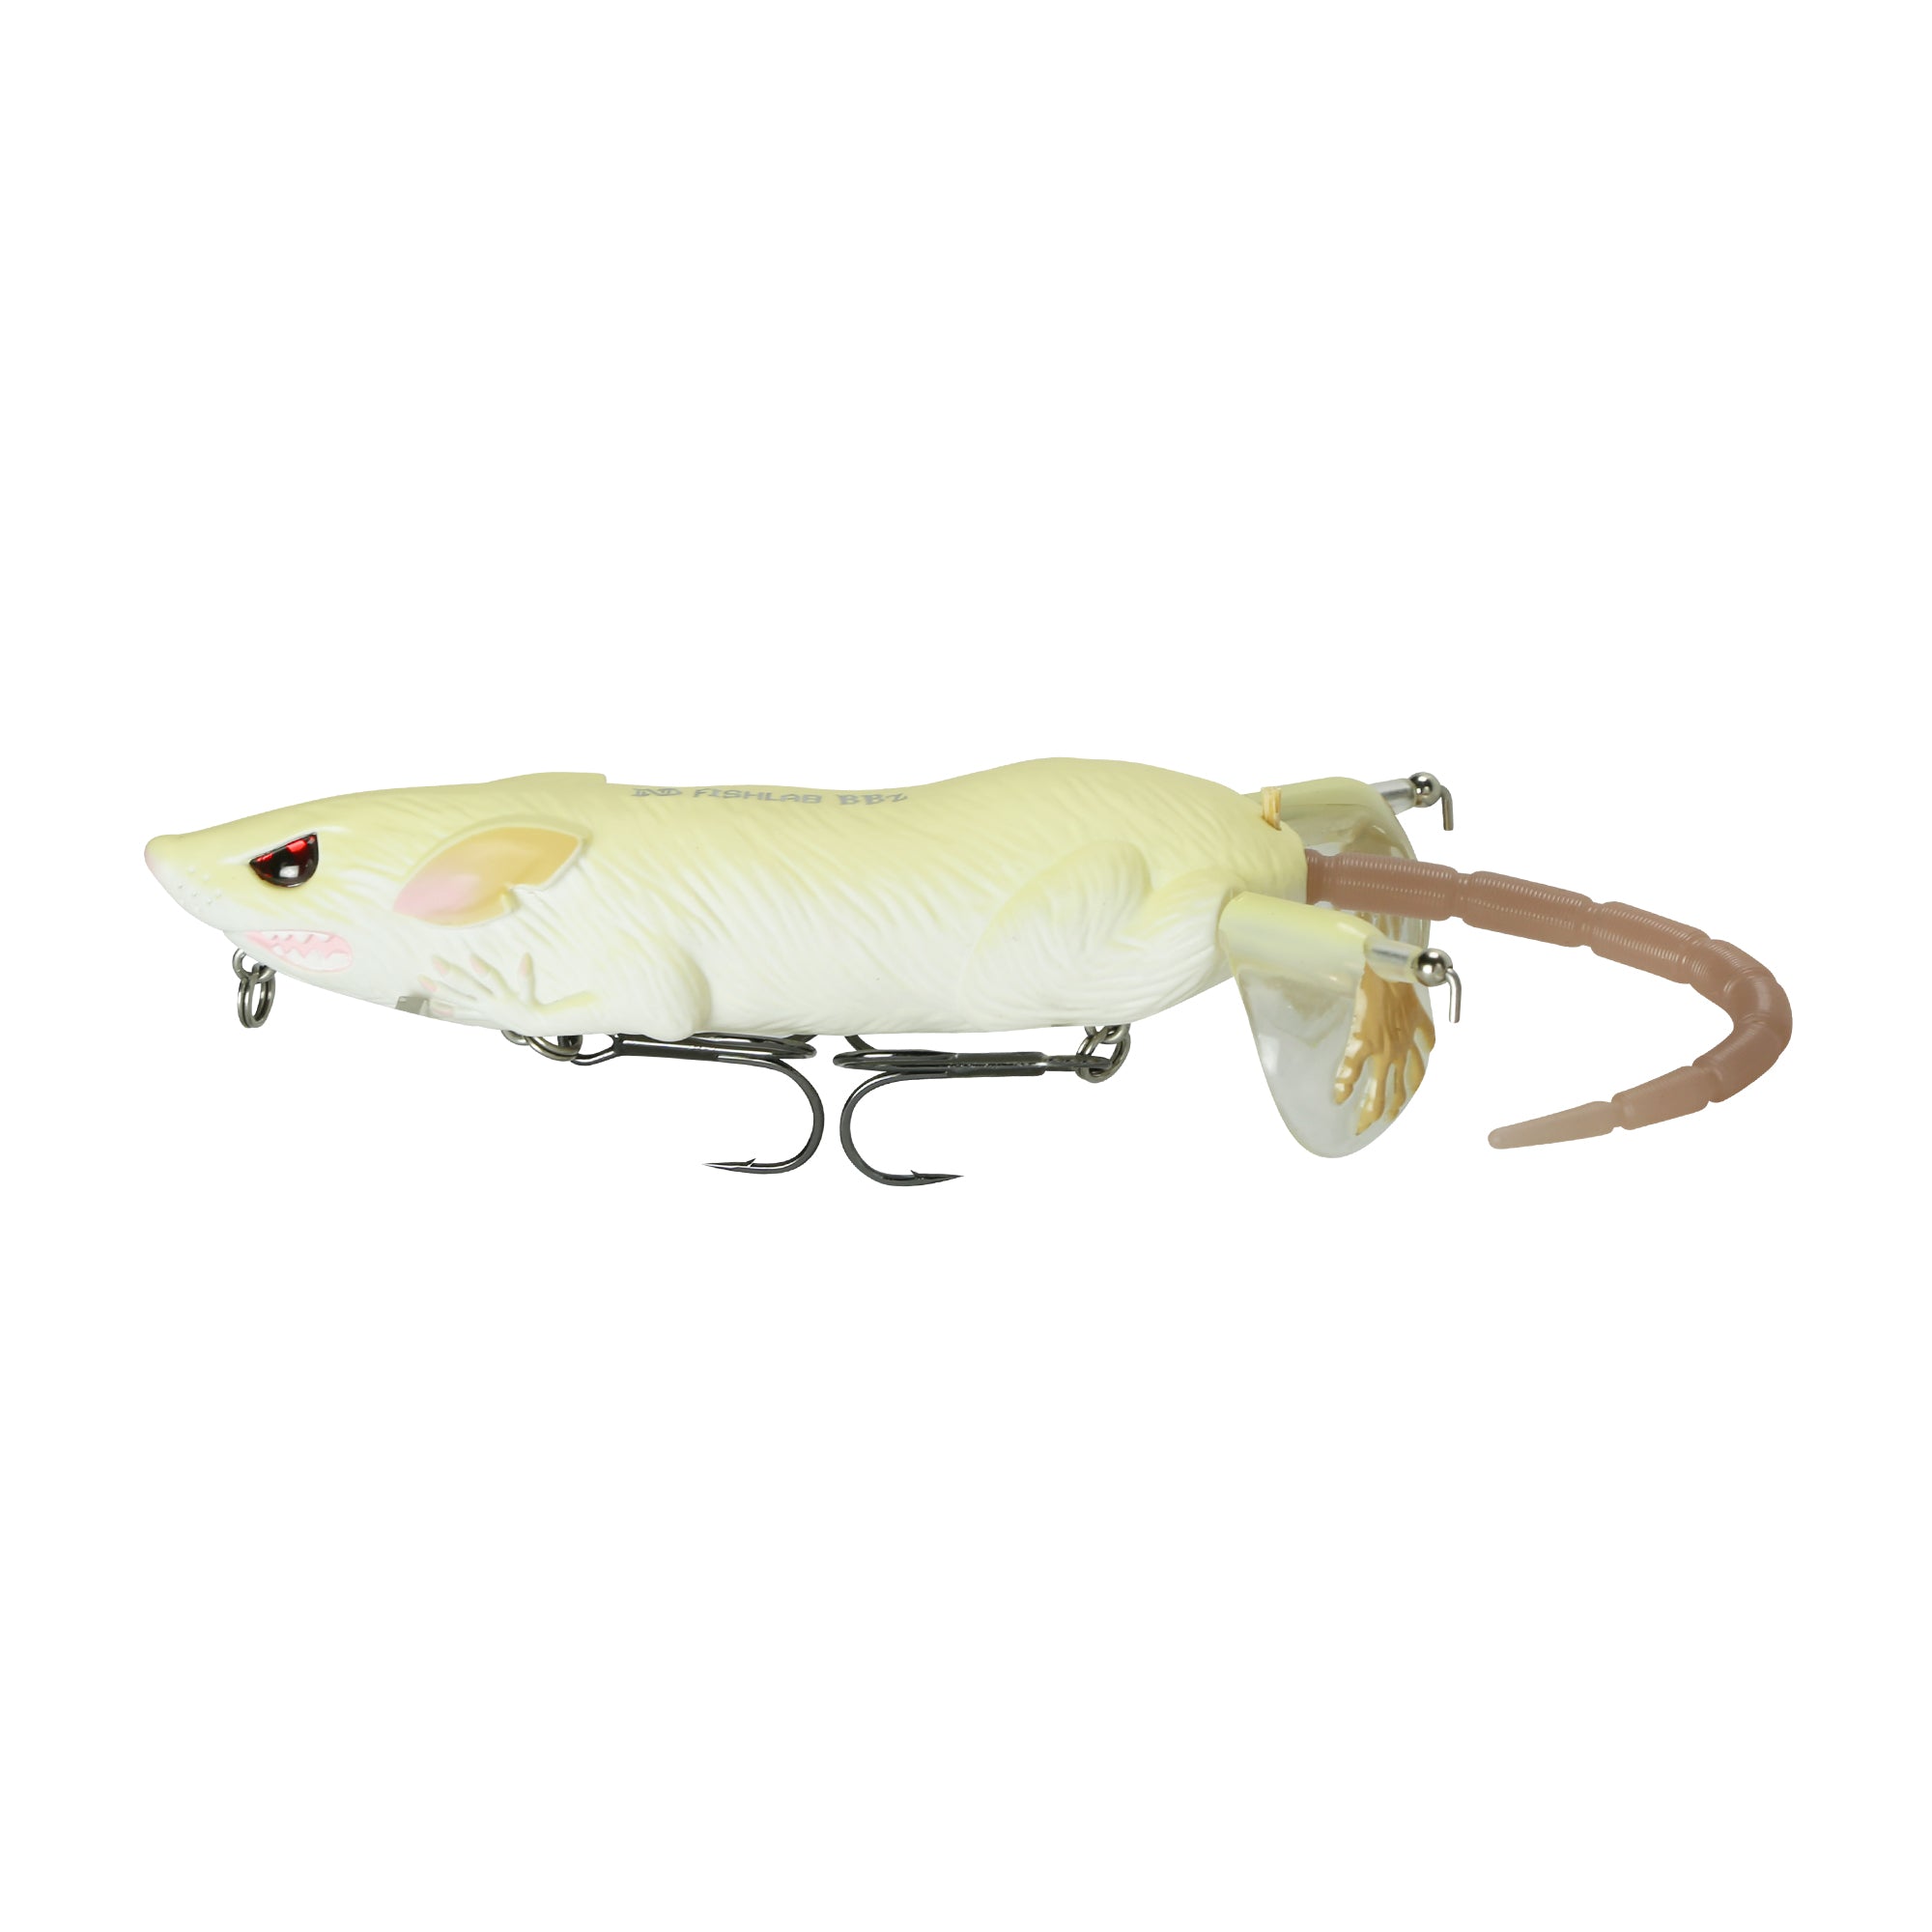 This Month's Newest Fishing Lures  The Freshest Baits from Karl's